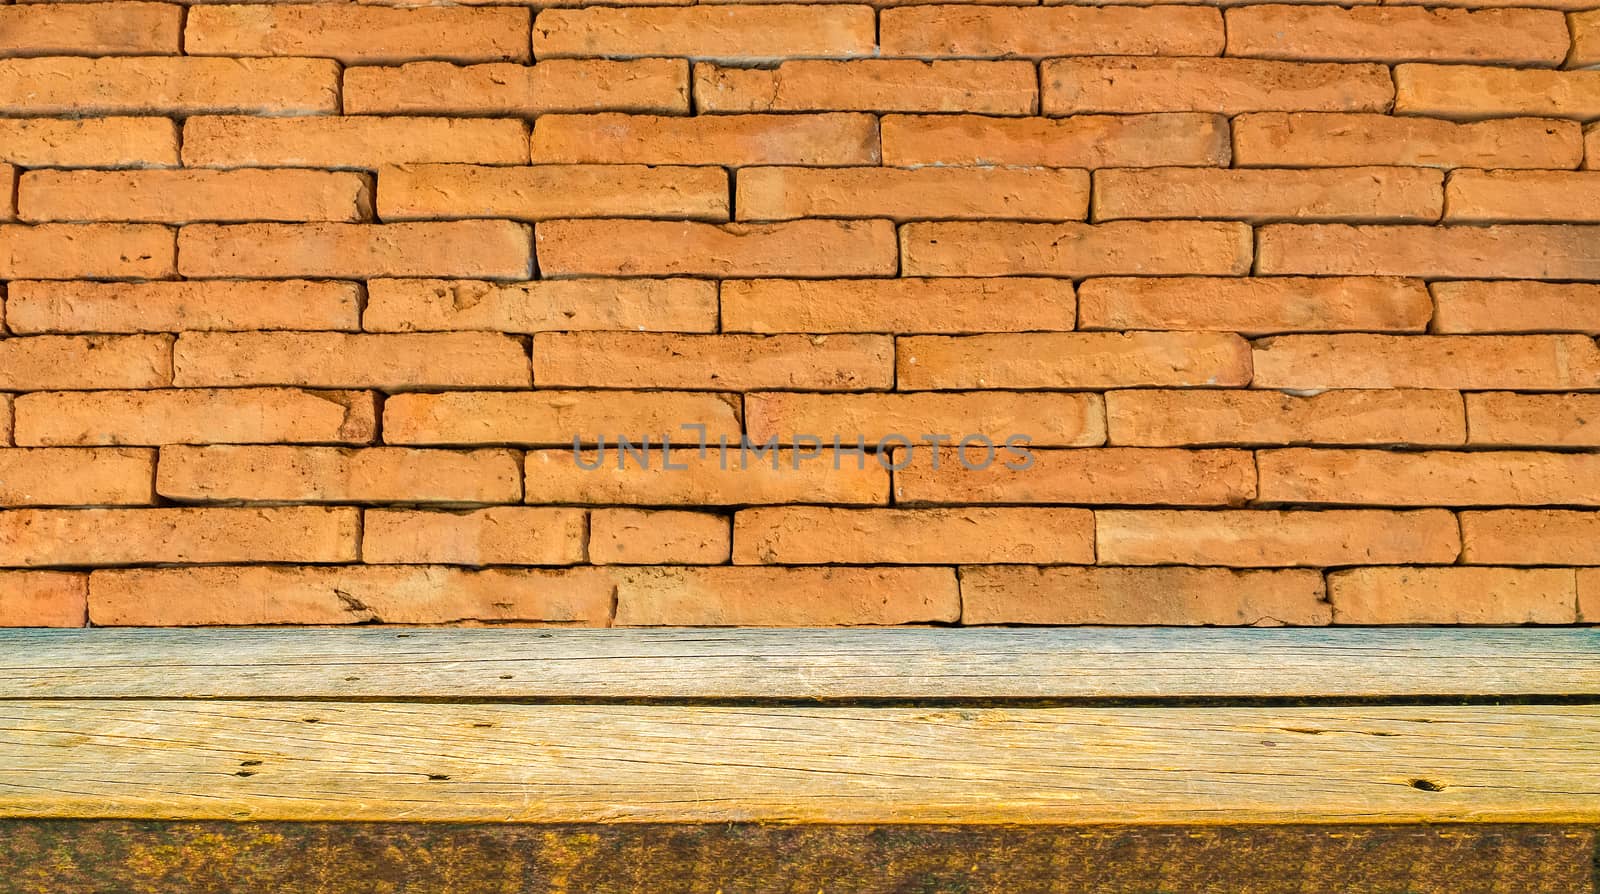 a natural wooden shelf in profile view with orange brick wall background